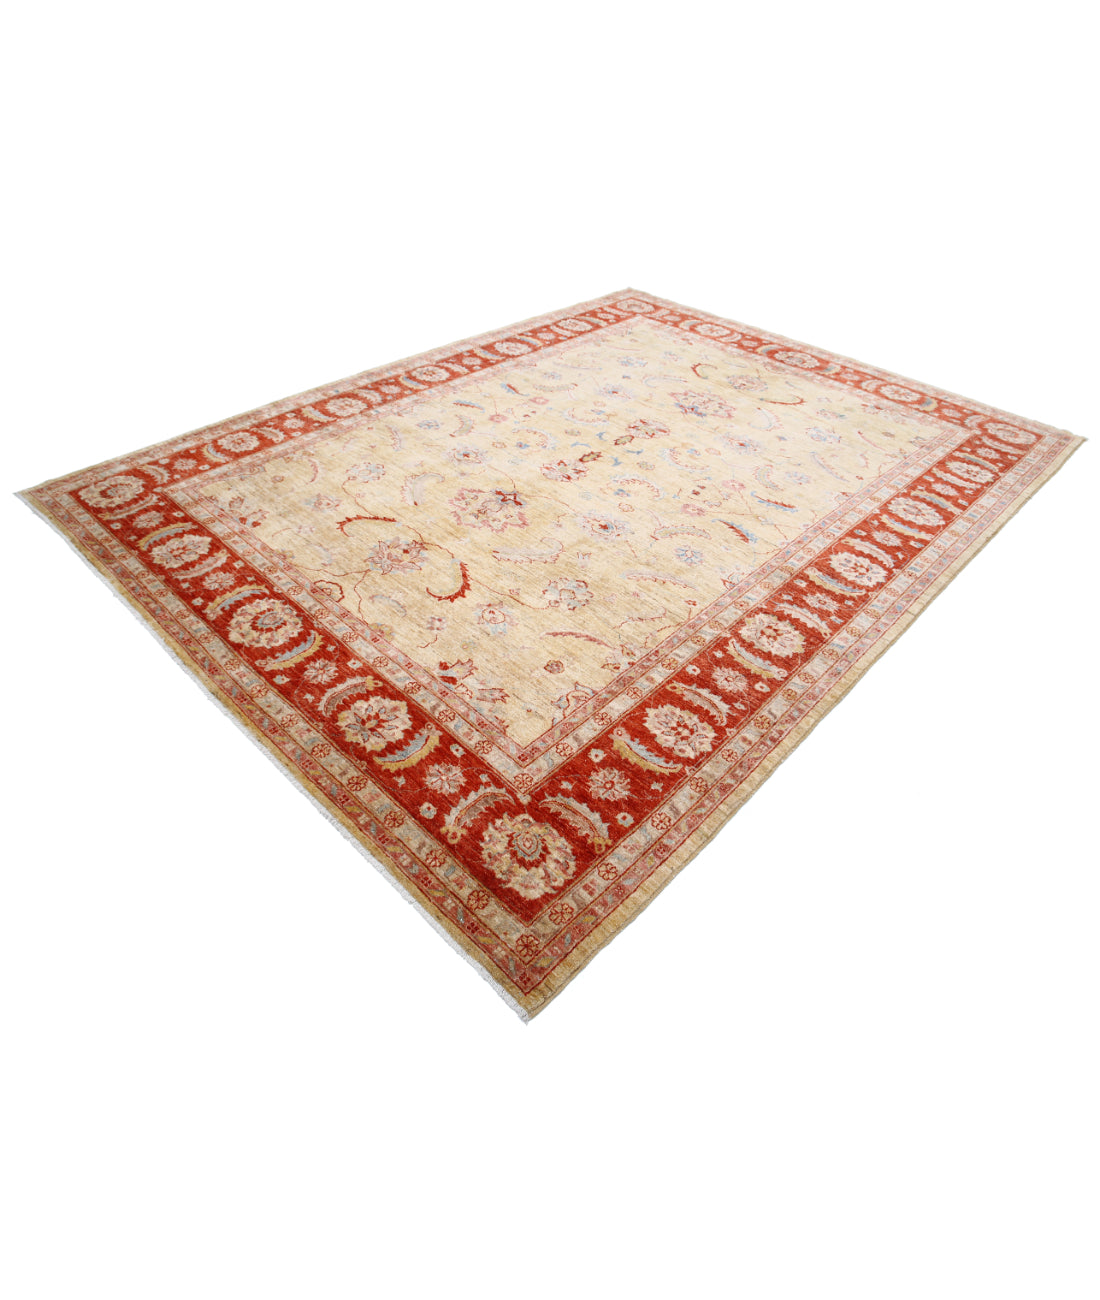 Hand Knotted Ziegler Sultanabad Wool Rug - 8'2'' x 10'8'' 8'2'' x 10'8'' (245 X 320) / Gold / Rust